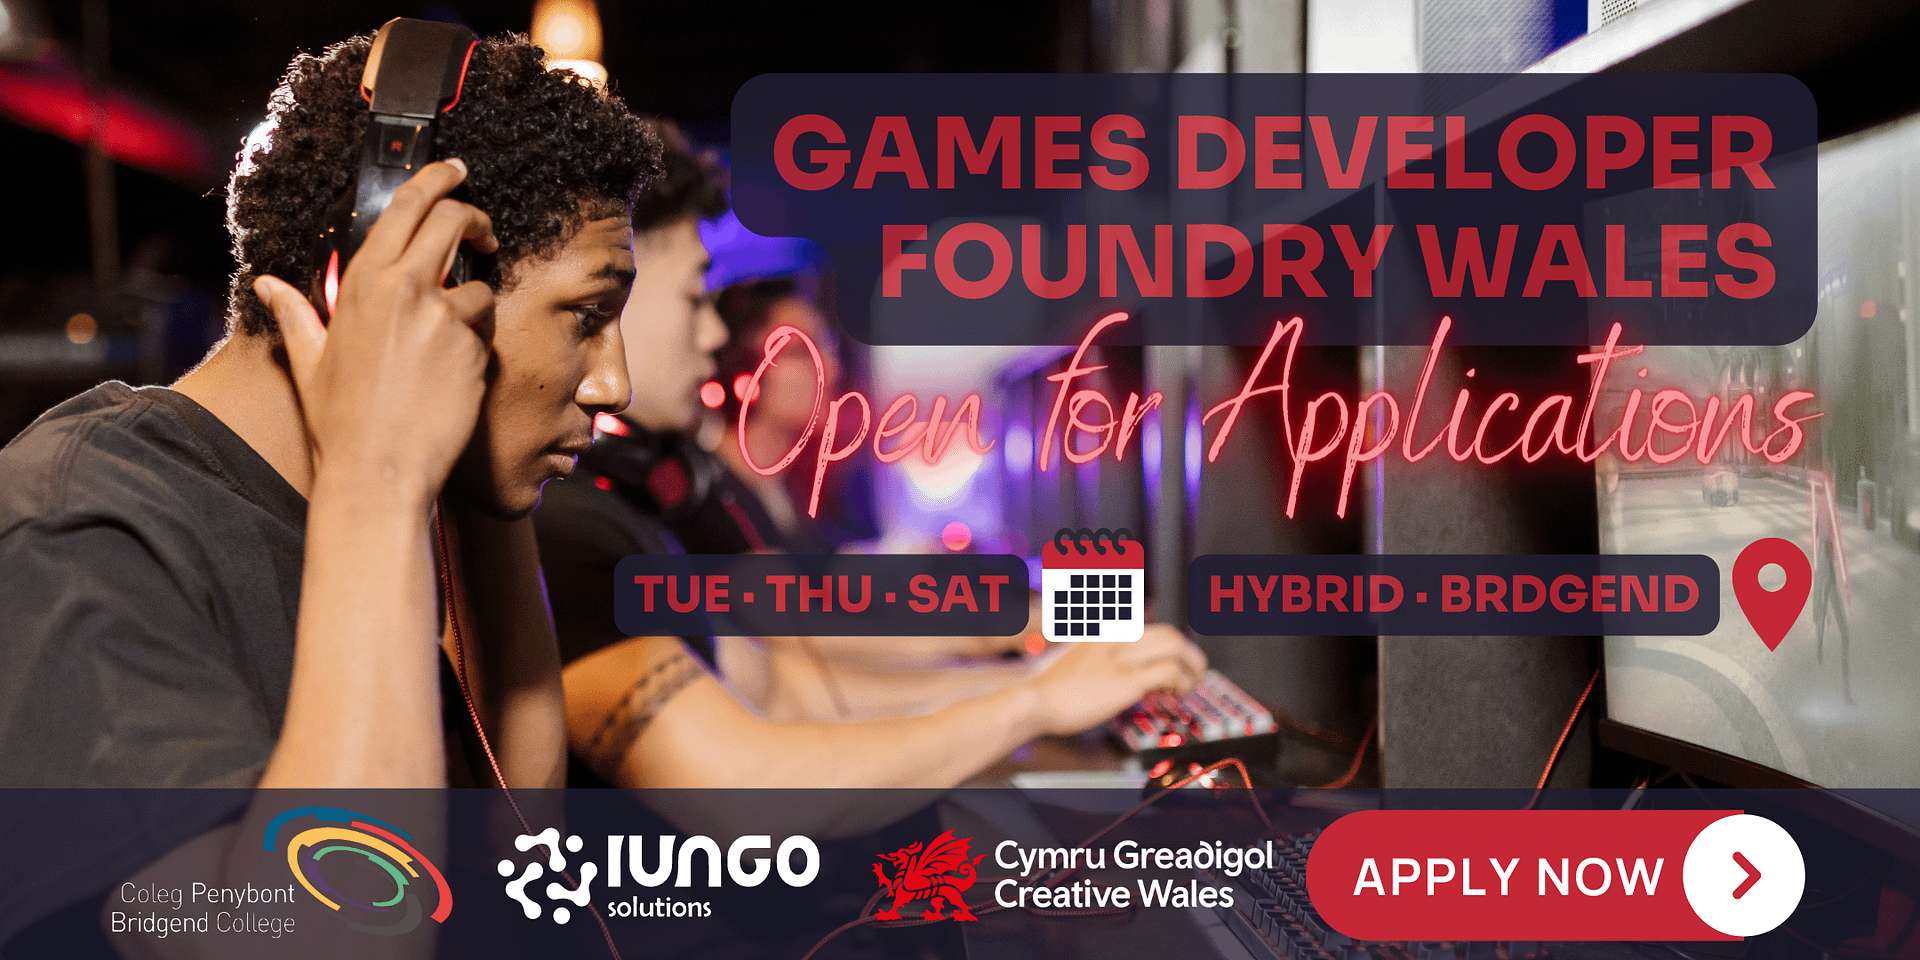 Games Developer Foundry Wales: Open for Applications